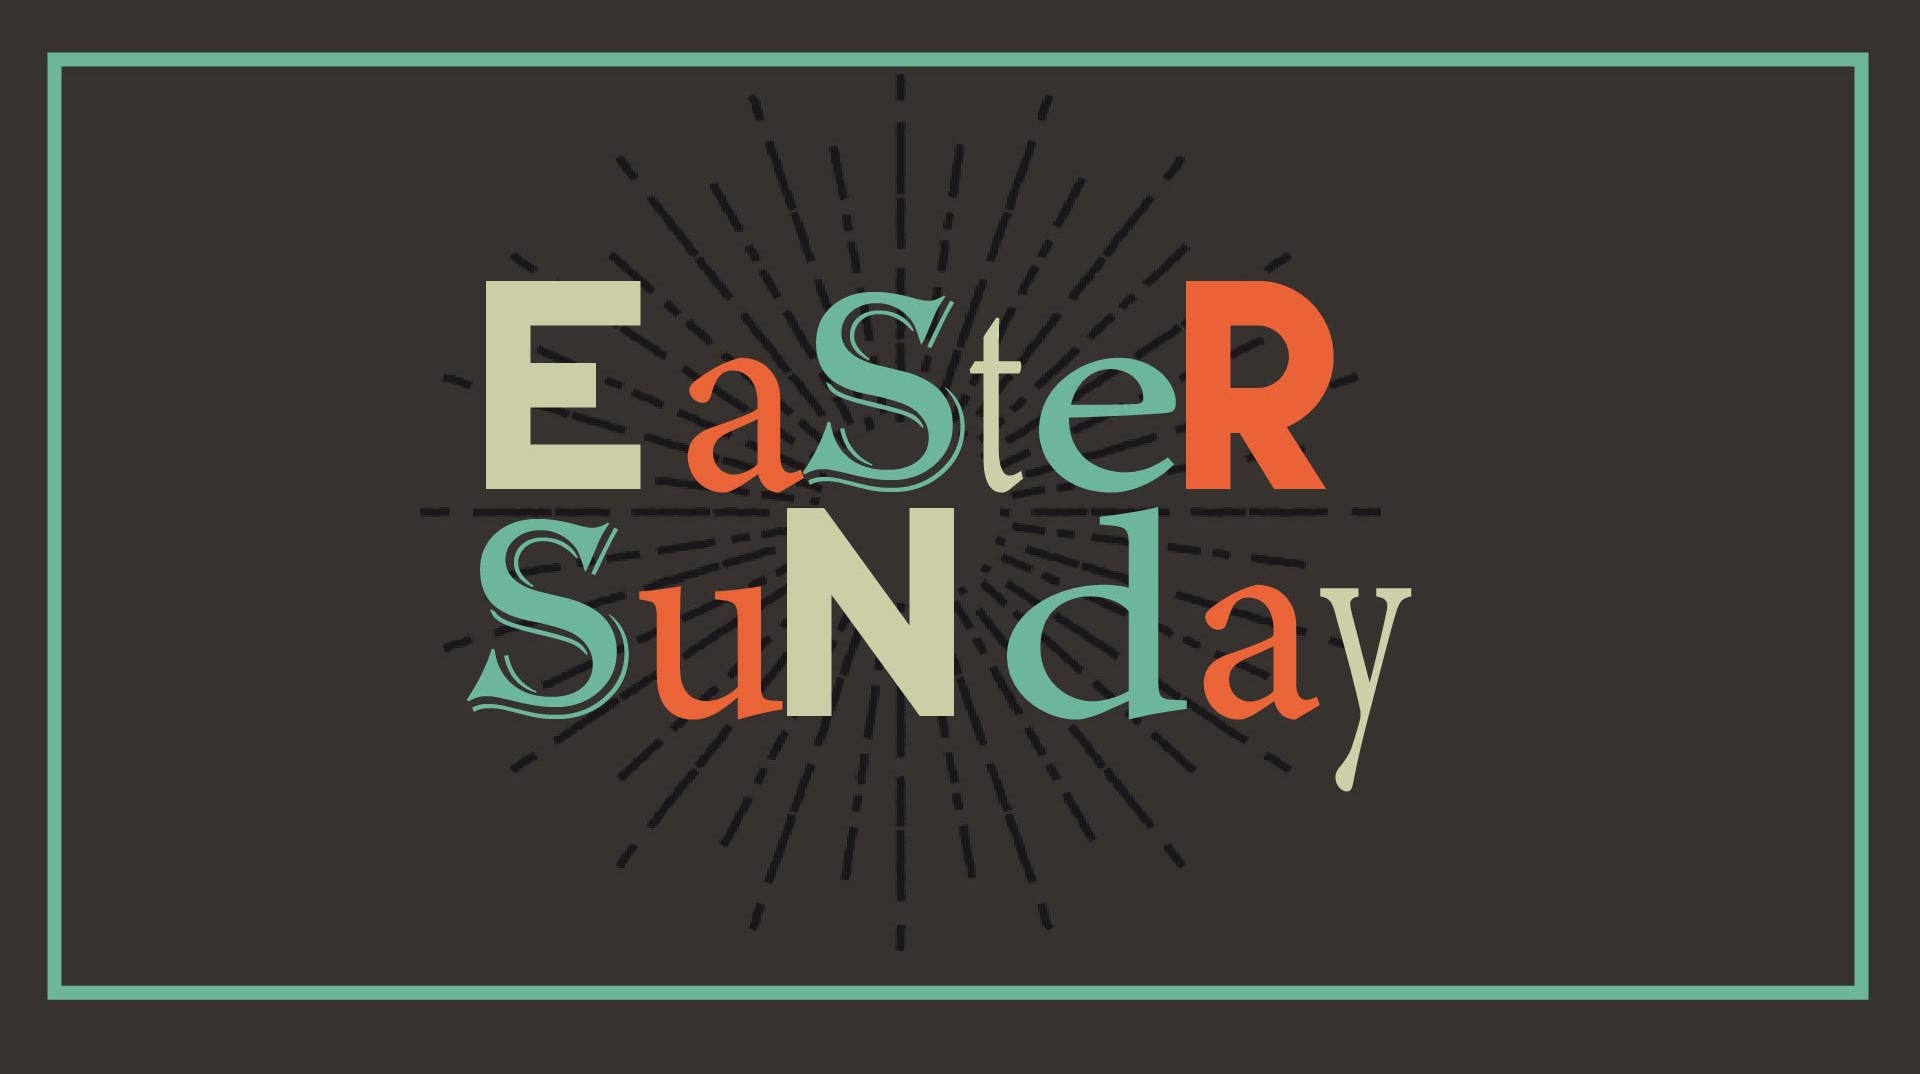 Easter Sunday graphic